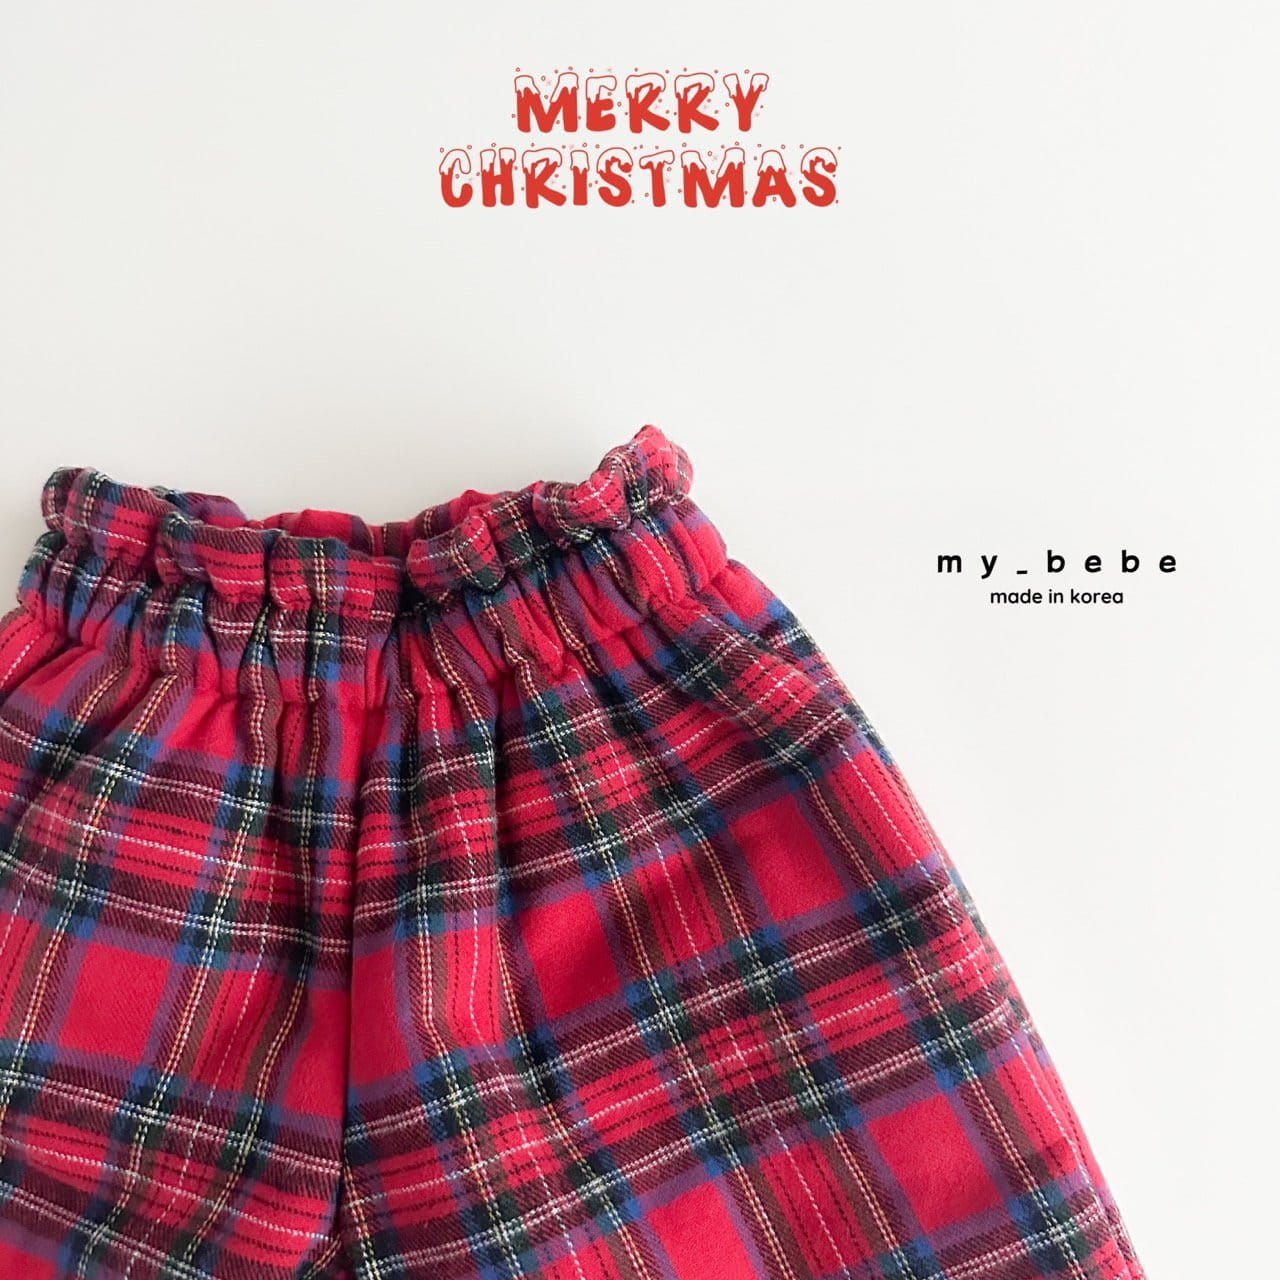 My Bebe - Korean Baby Fashion - #babyfever - The End Of Year Pants - 2